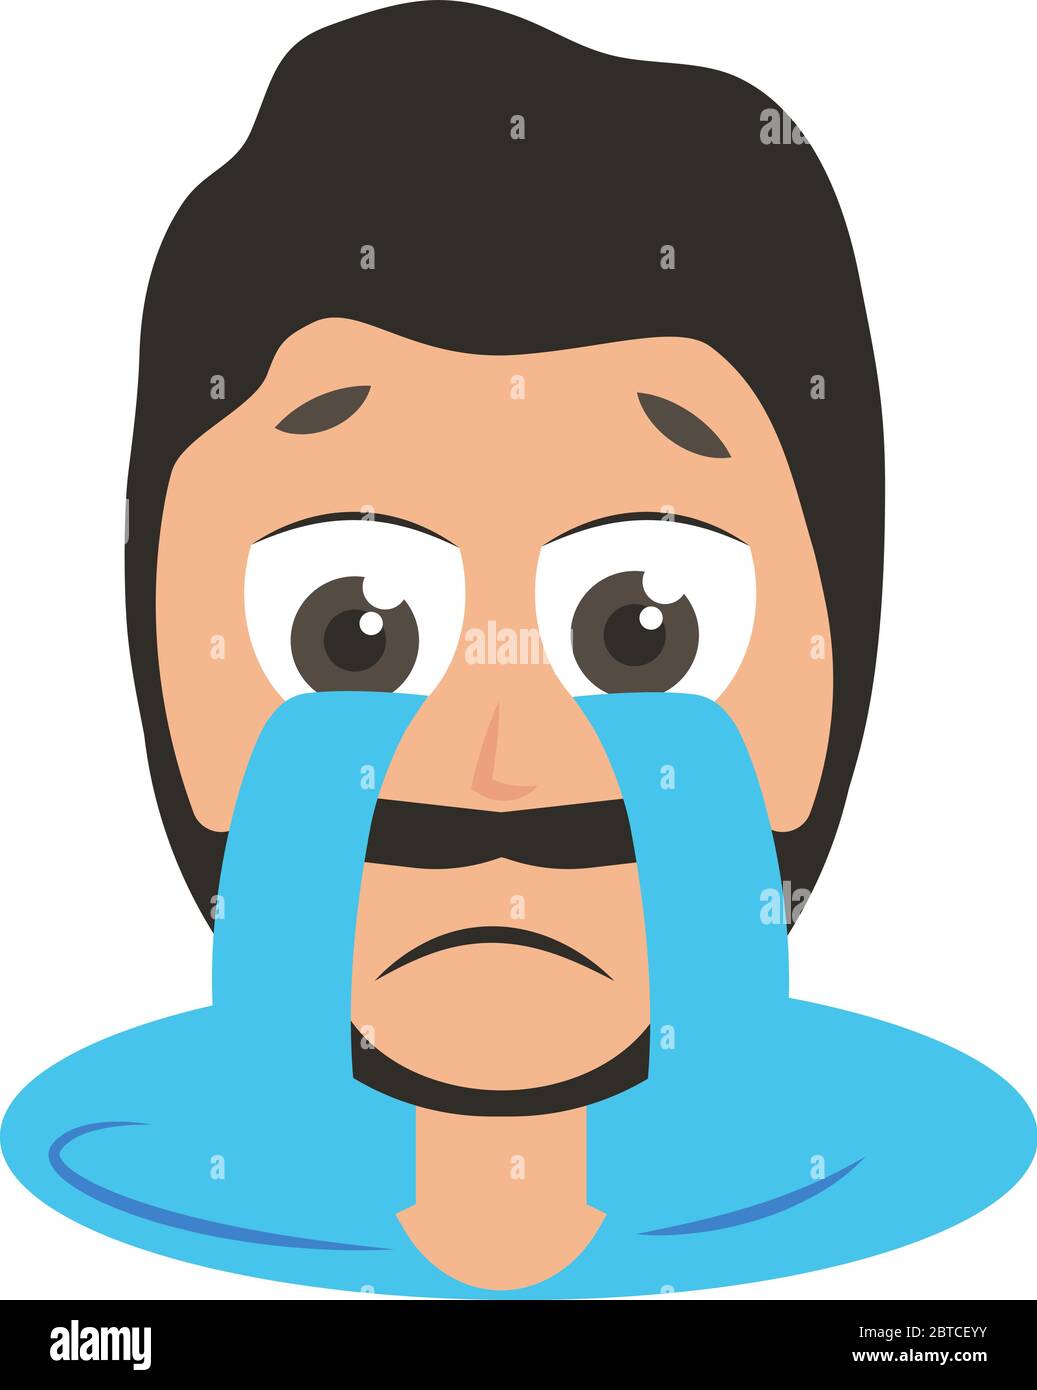 Man crying, illustration, vector on white background Stock Vector